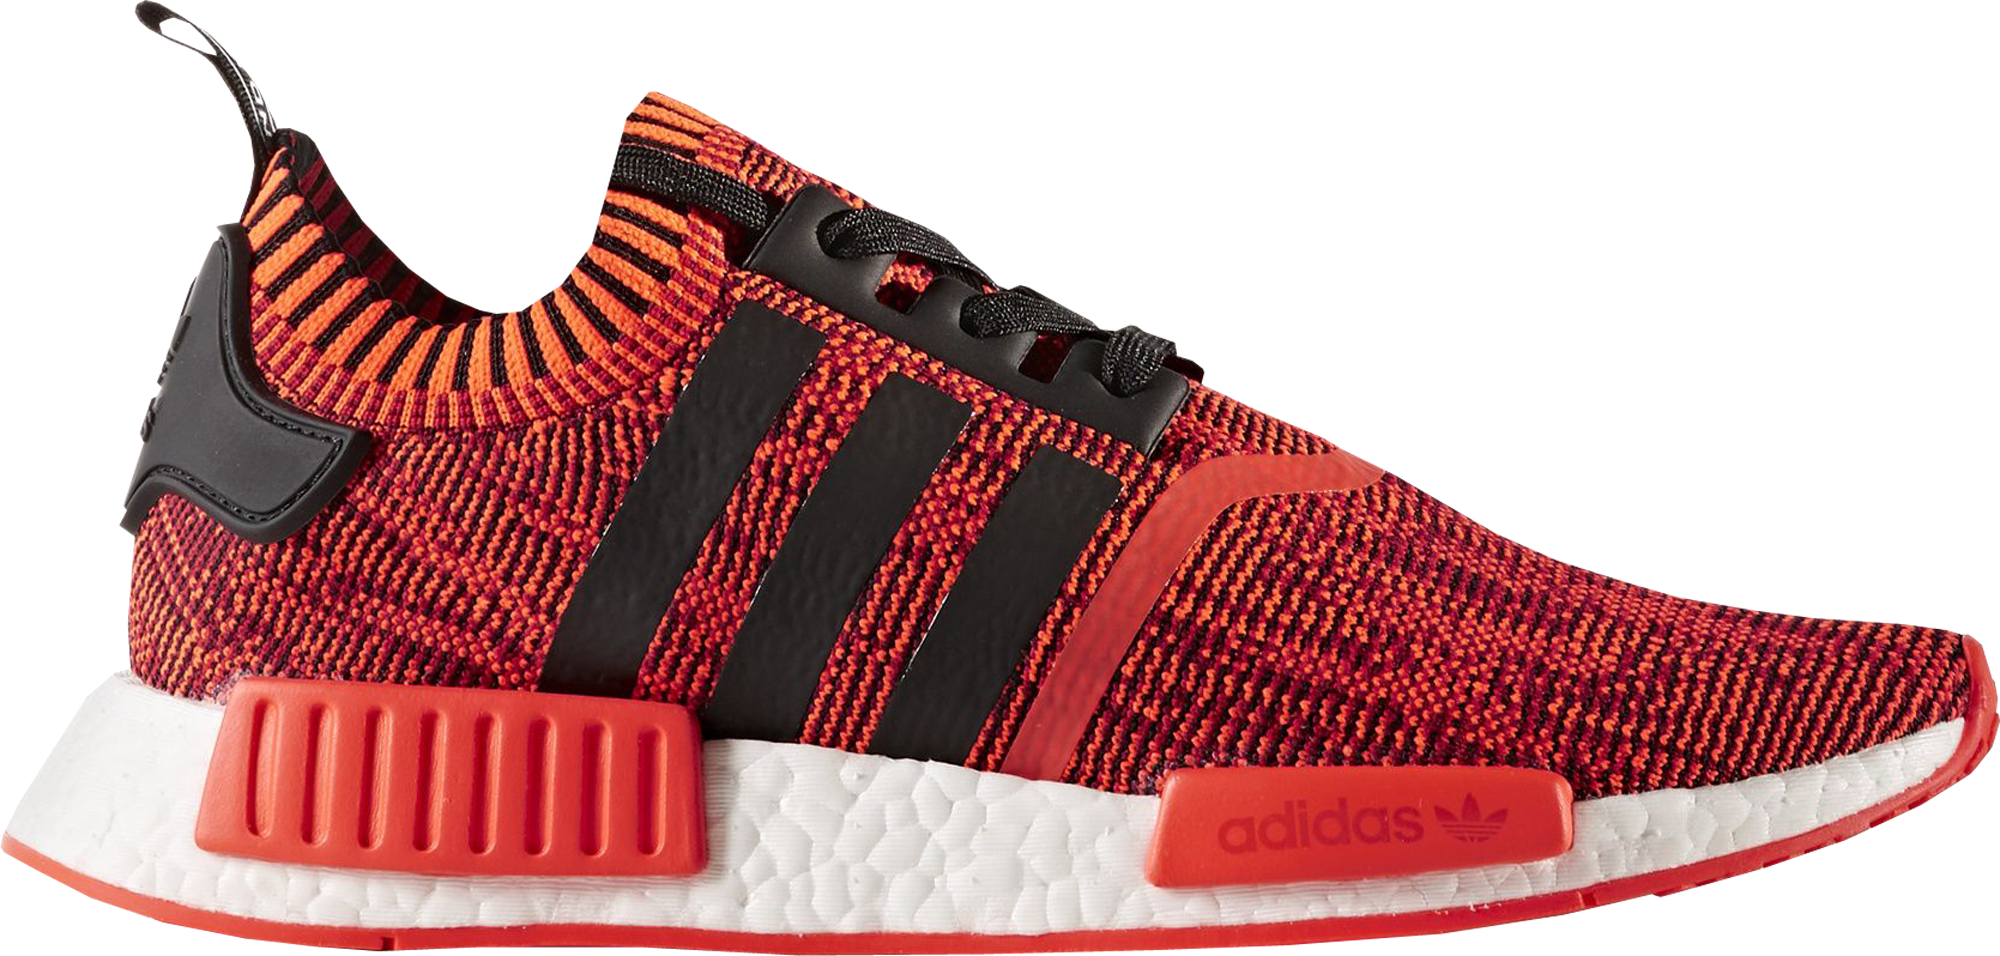 nmd red apple 2.0